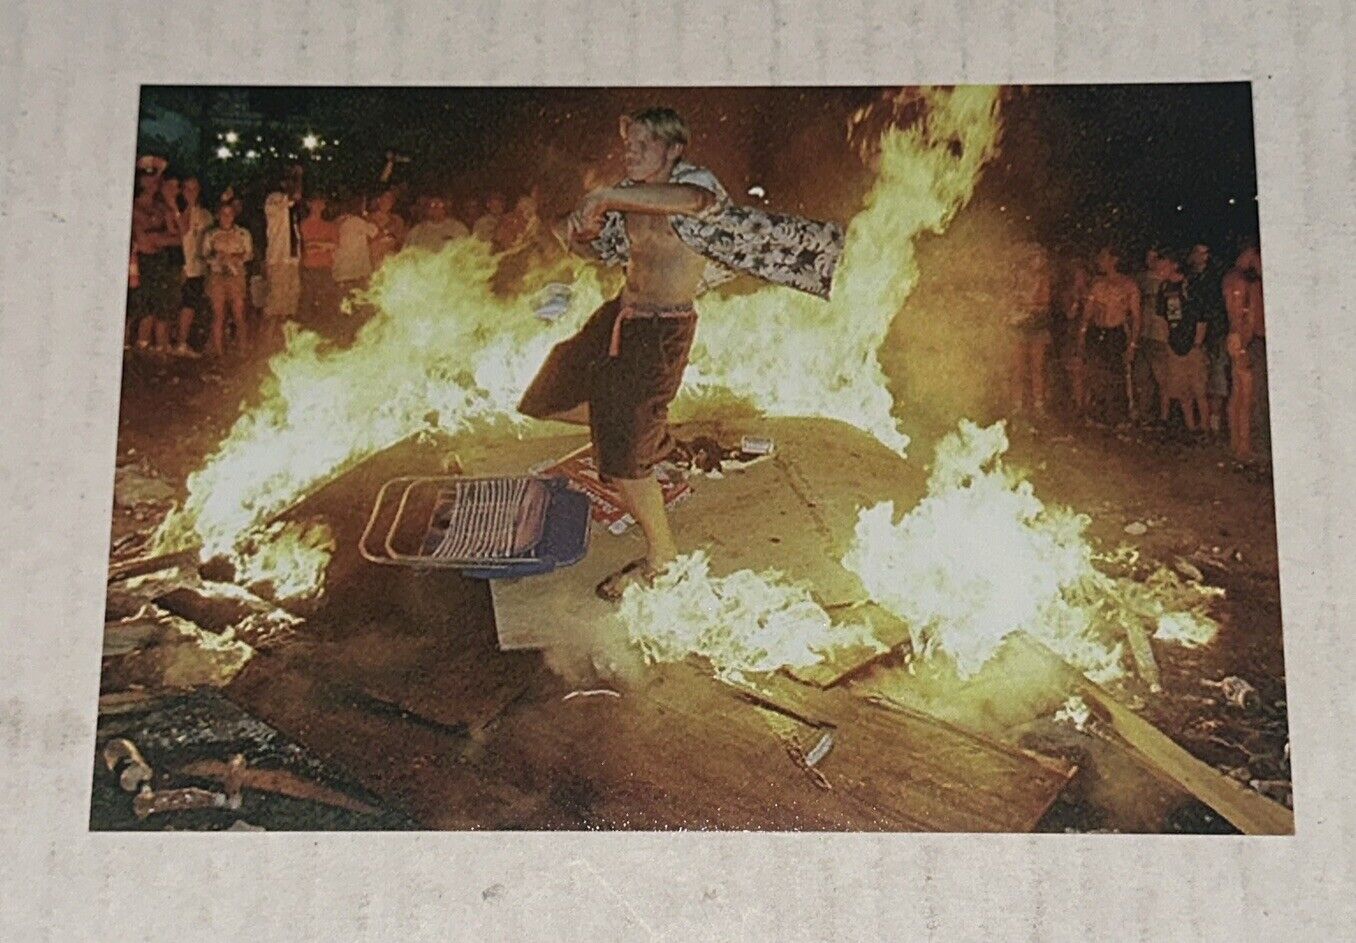 1999 Woodstock Music Festival Riots Fire Out of Control Crowd 4\